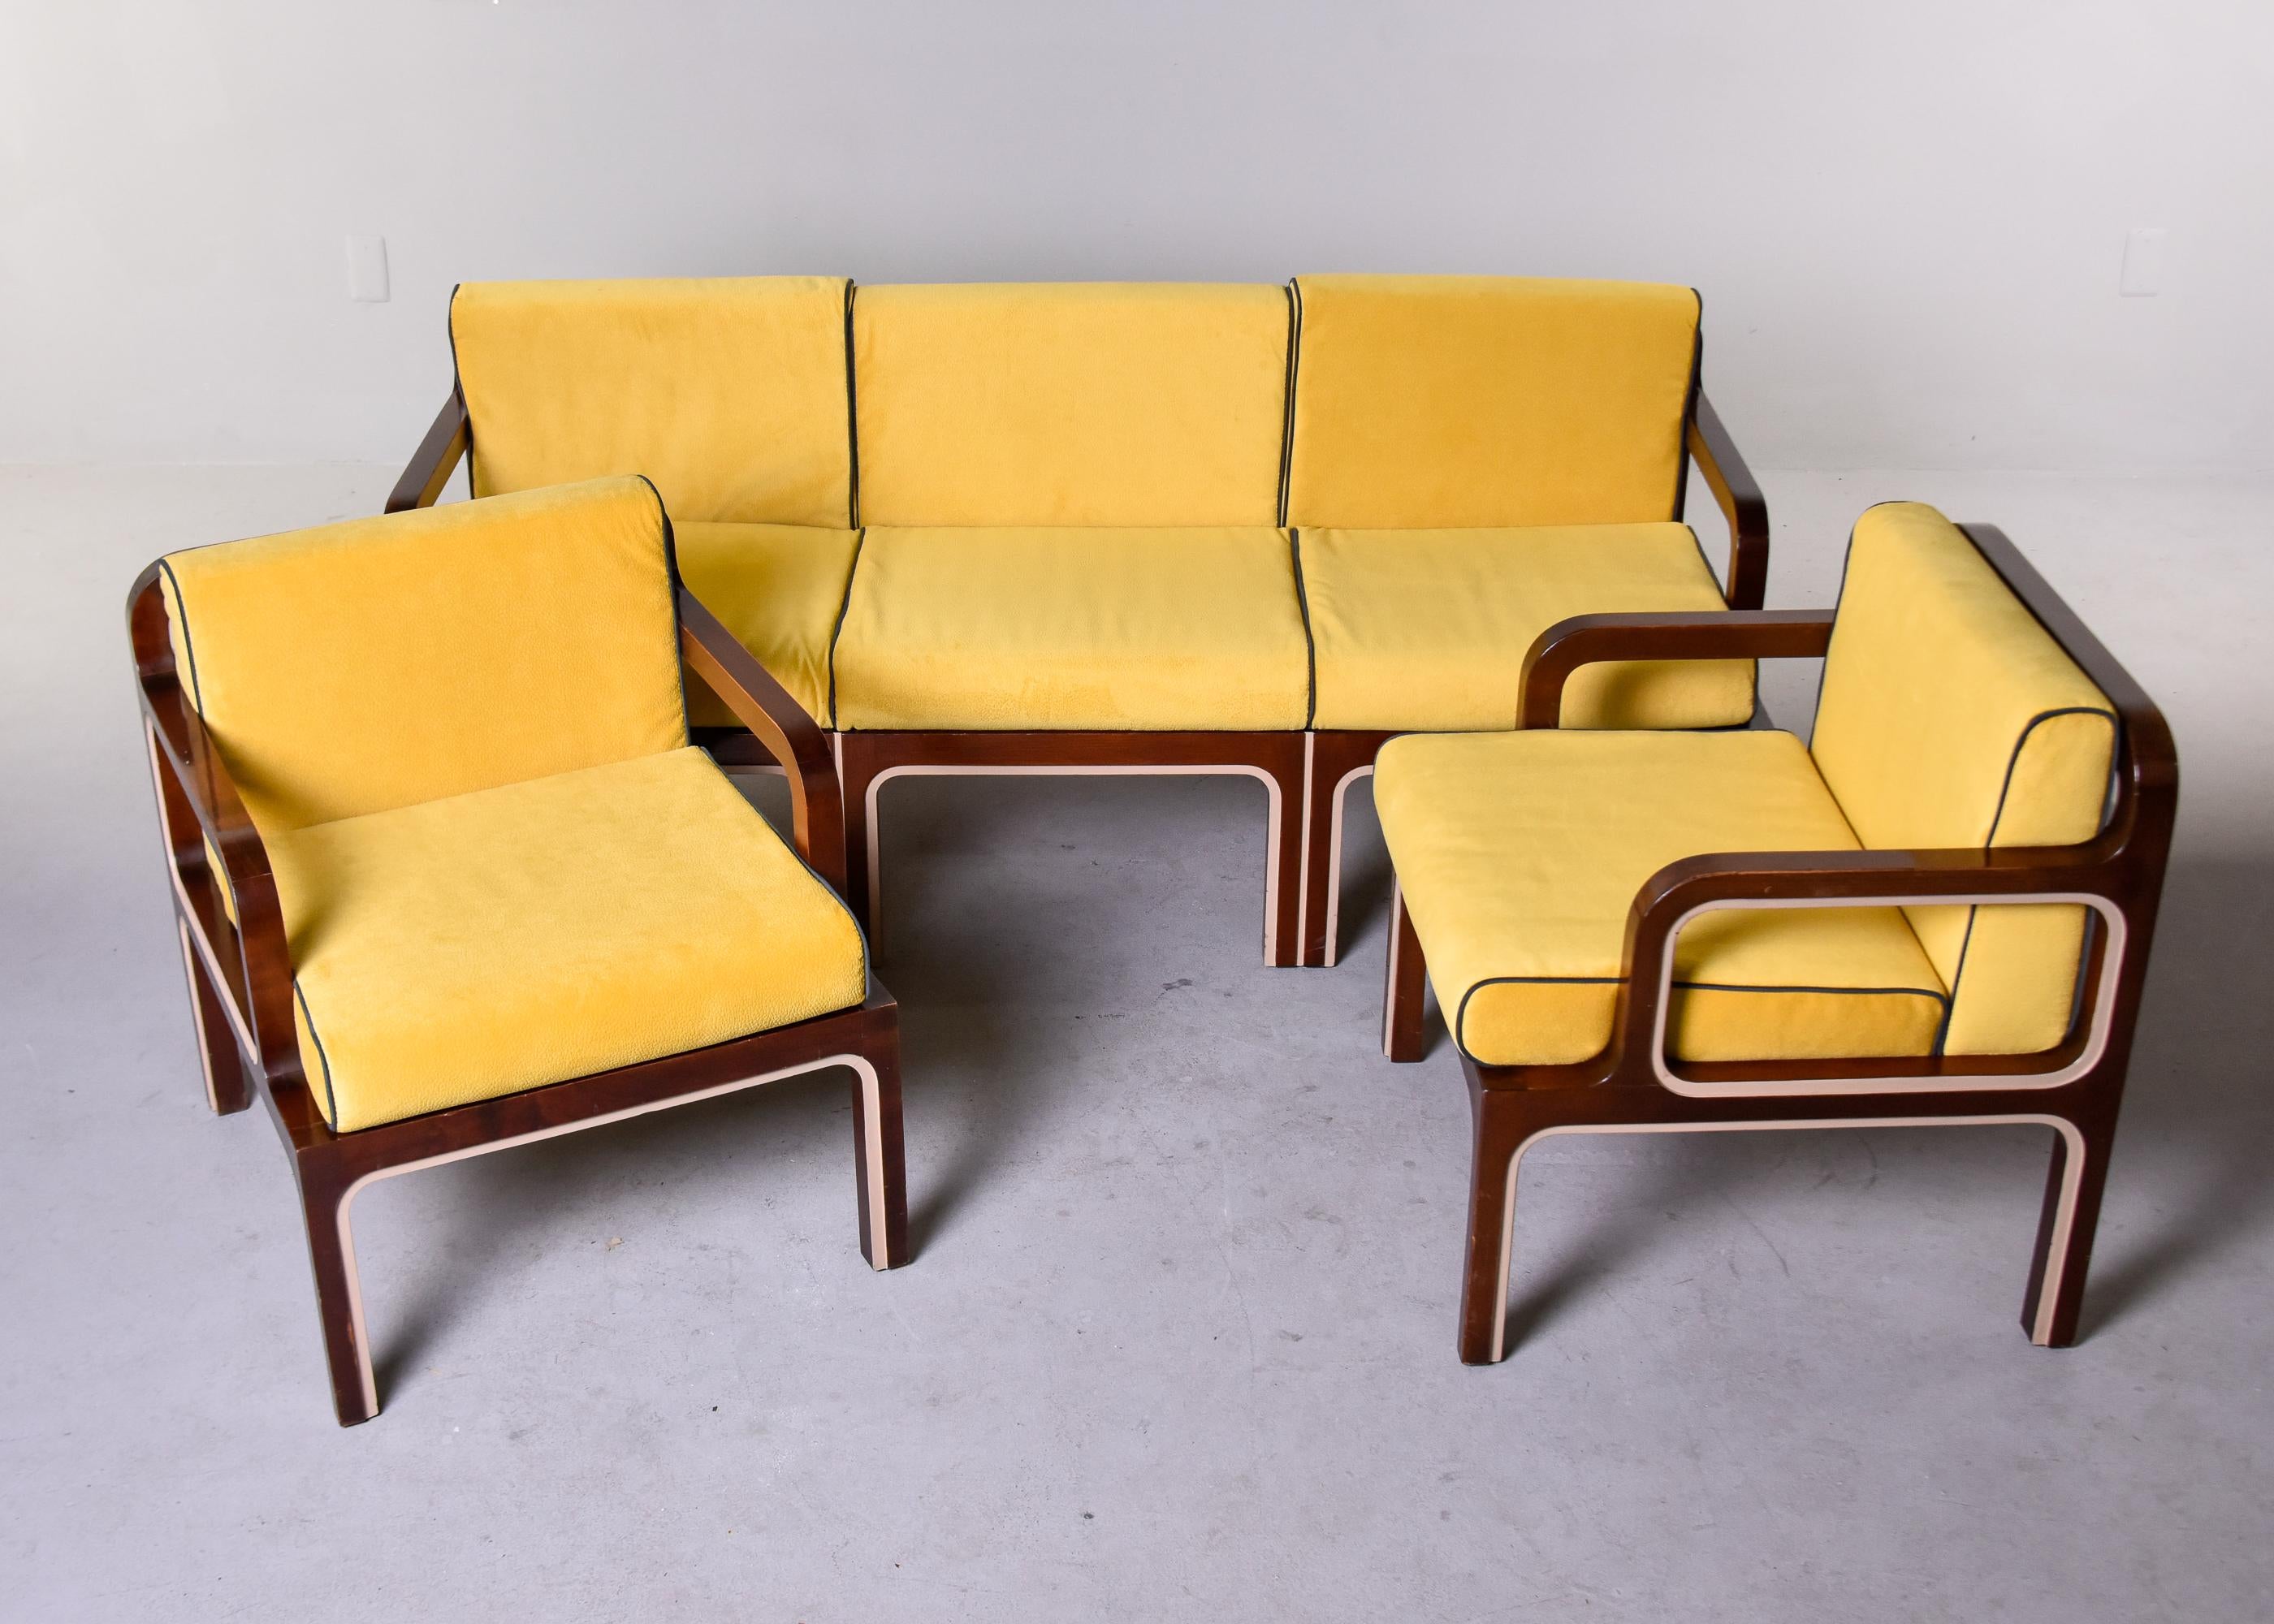 This sofa and pair of chairs is from London and dates from the early 1970s. All three pieces were newly upholstered in a gold moleskin fabric with black welting by the European dealer we acquired the set from. Dark wood frames have a lacquered